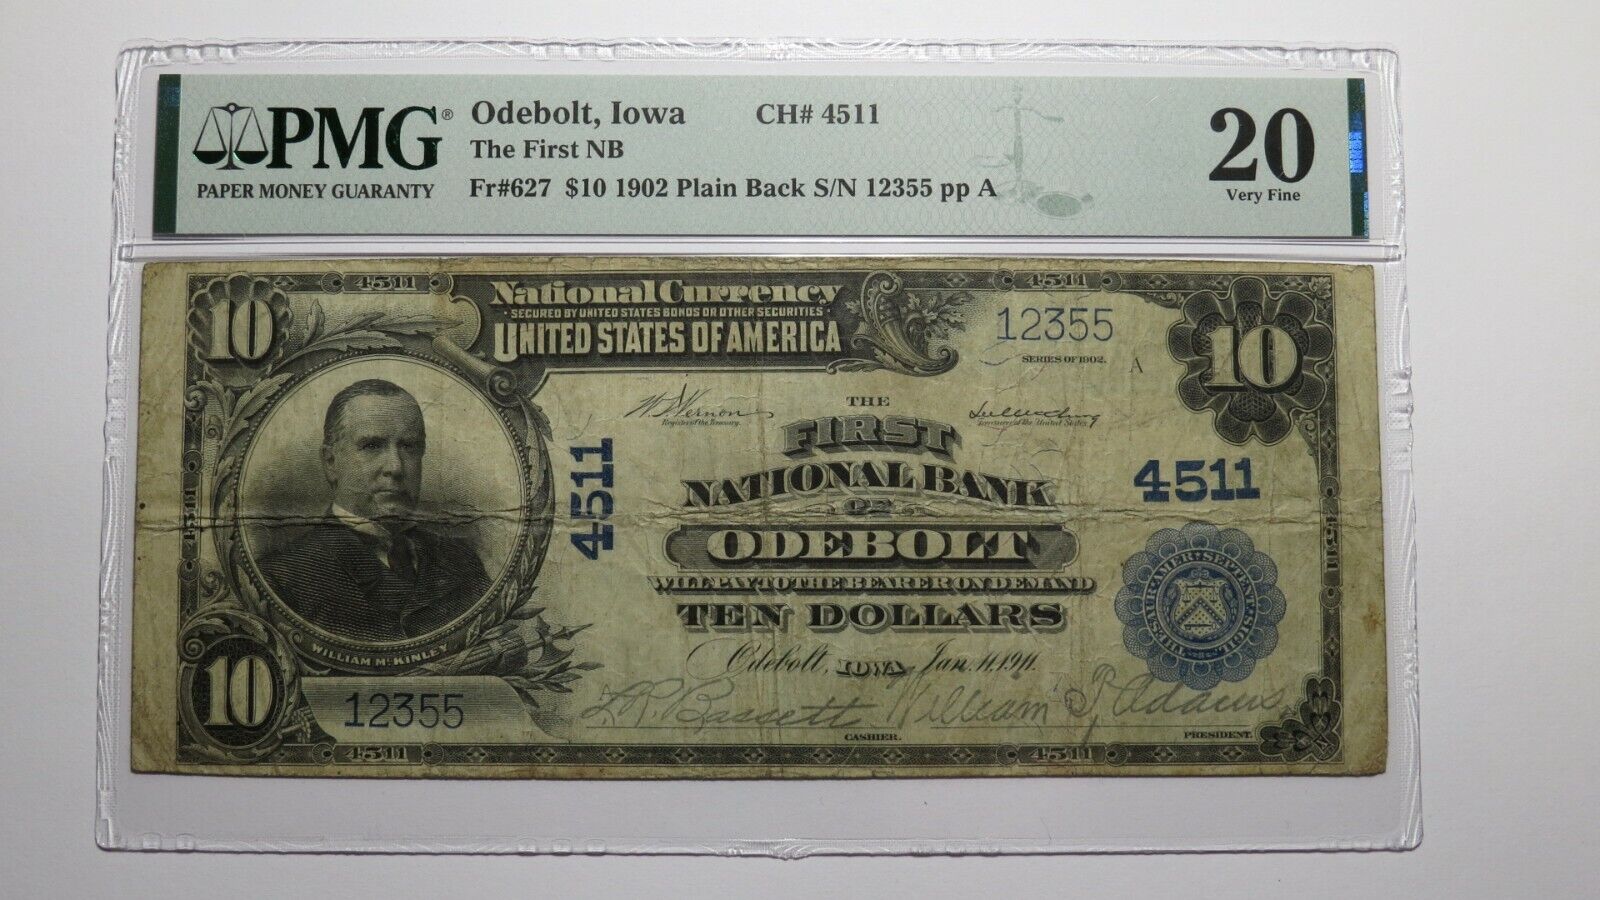 $10 1902 Odebolt Iowa IA National Currency Bank Note Bill Ch. #4511 VF20 PMG